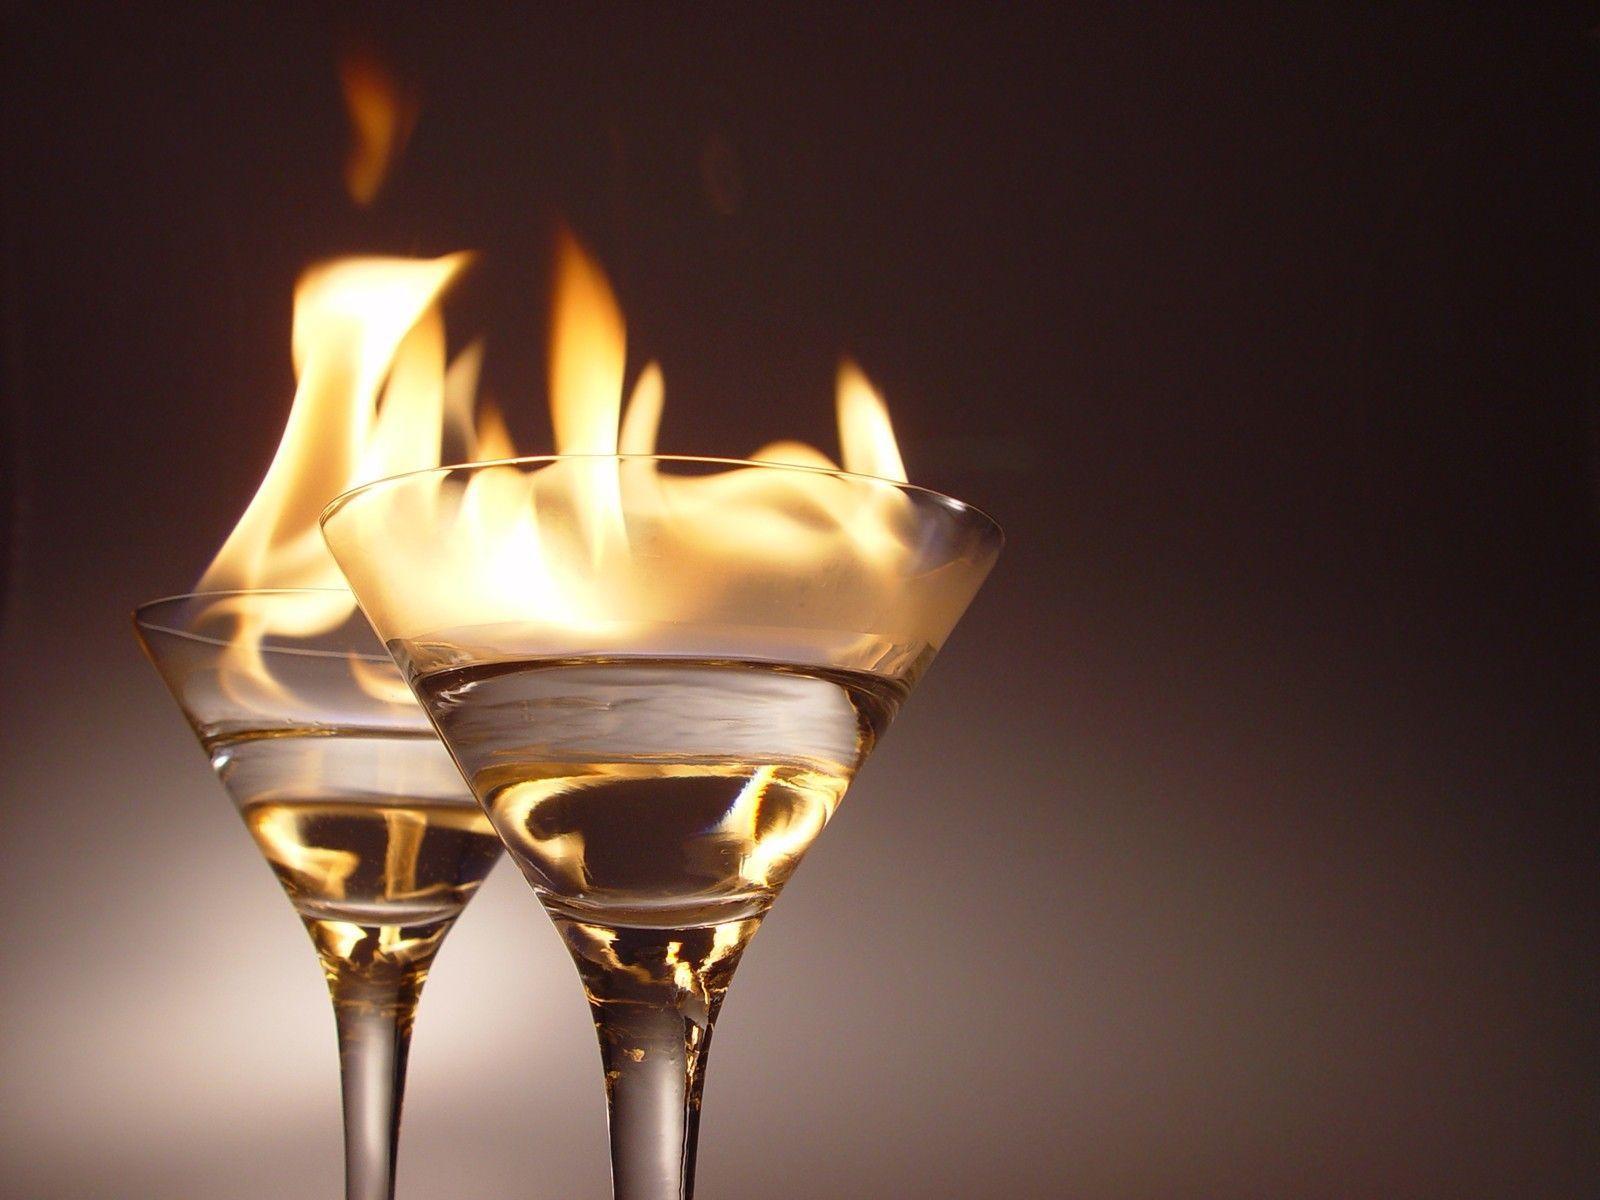 Flames fire glasses alcohol wine champagne wallpaper